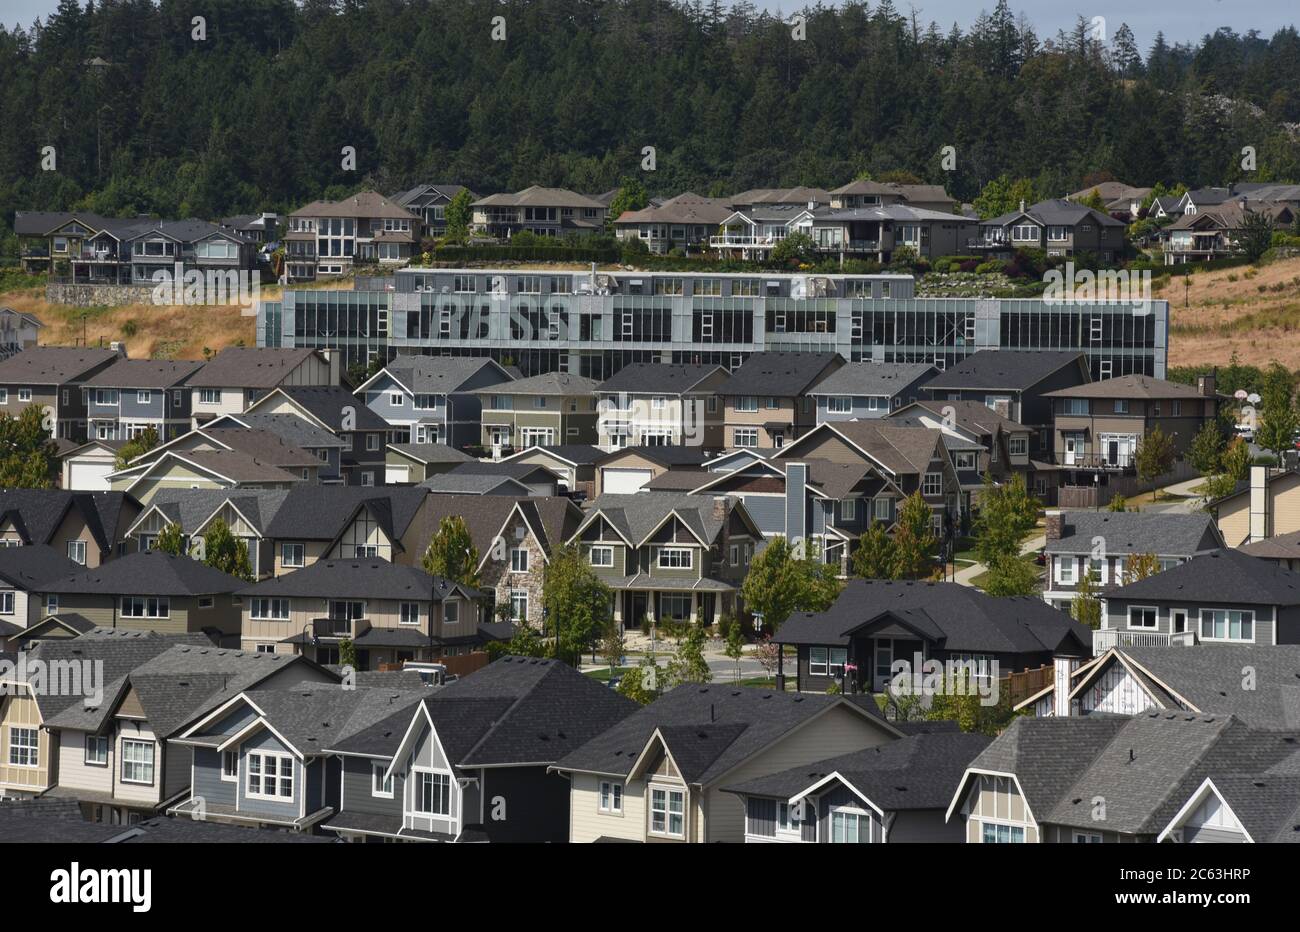 Houses crowd the streets of the Royal Bay development in Colwood, British Columbia, Canada.  Colwood is a small city, part of greater Victoria on Vanc Stock Photo